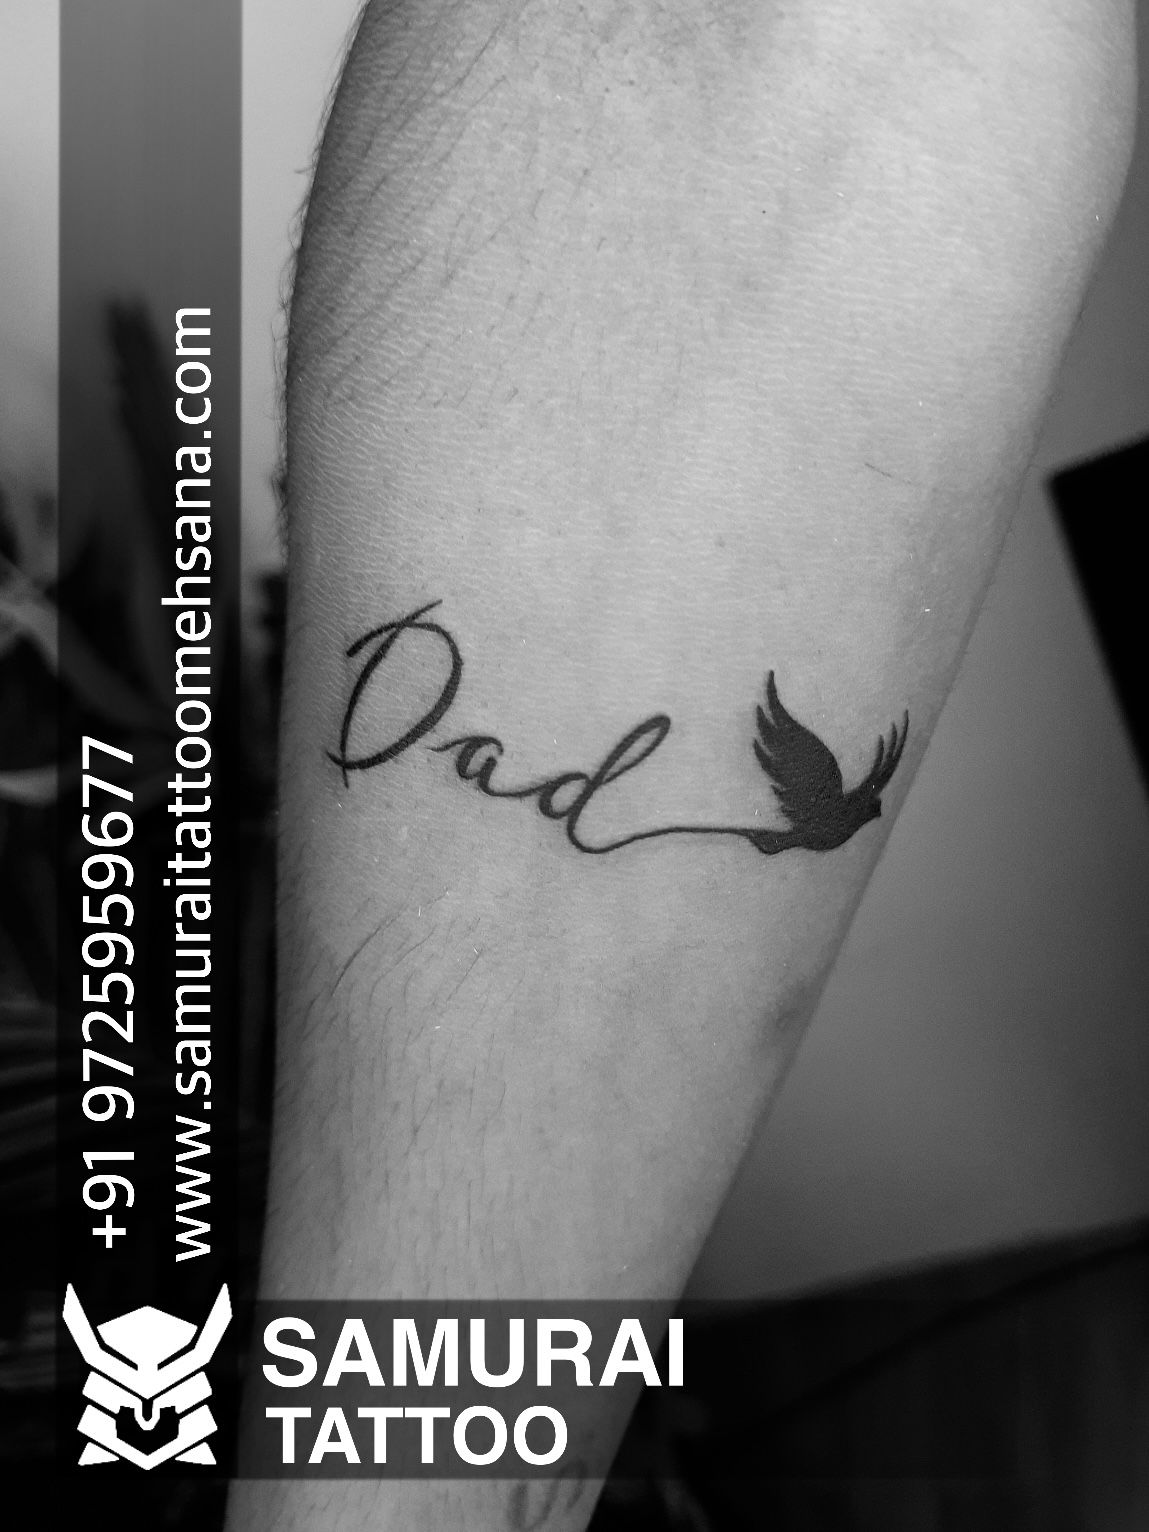 How to make dad name tattoo at home with pen  Tattoo design   YouTube